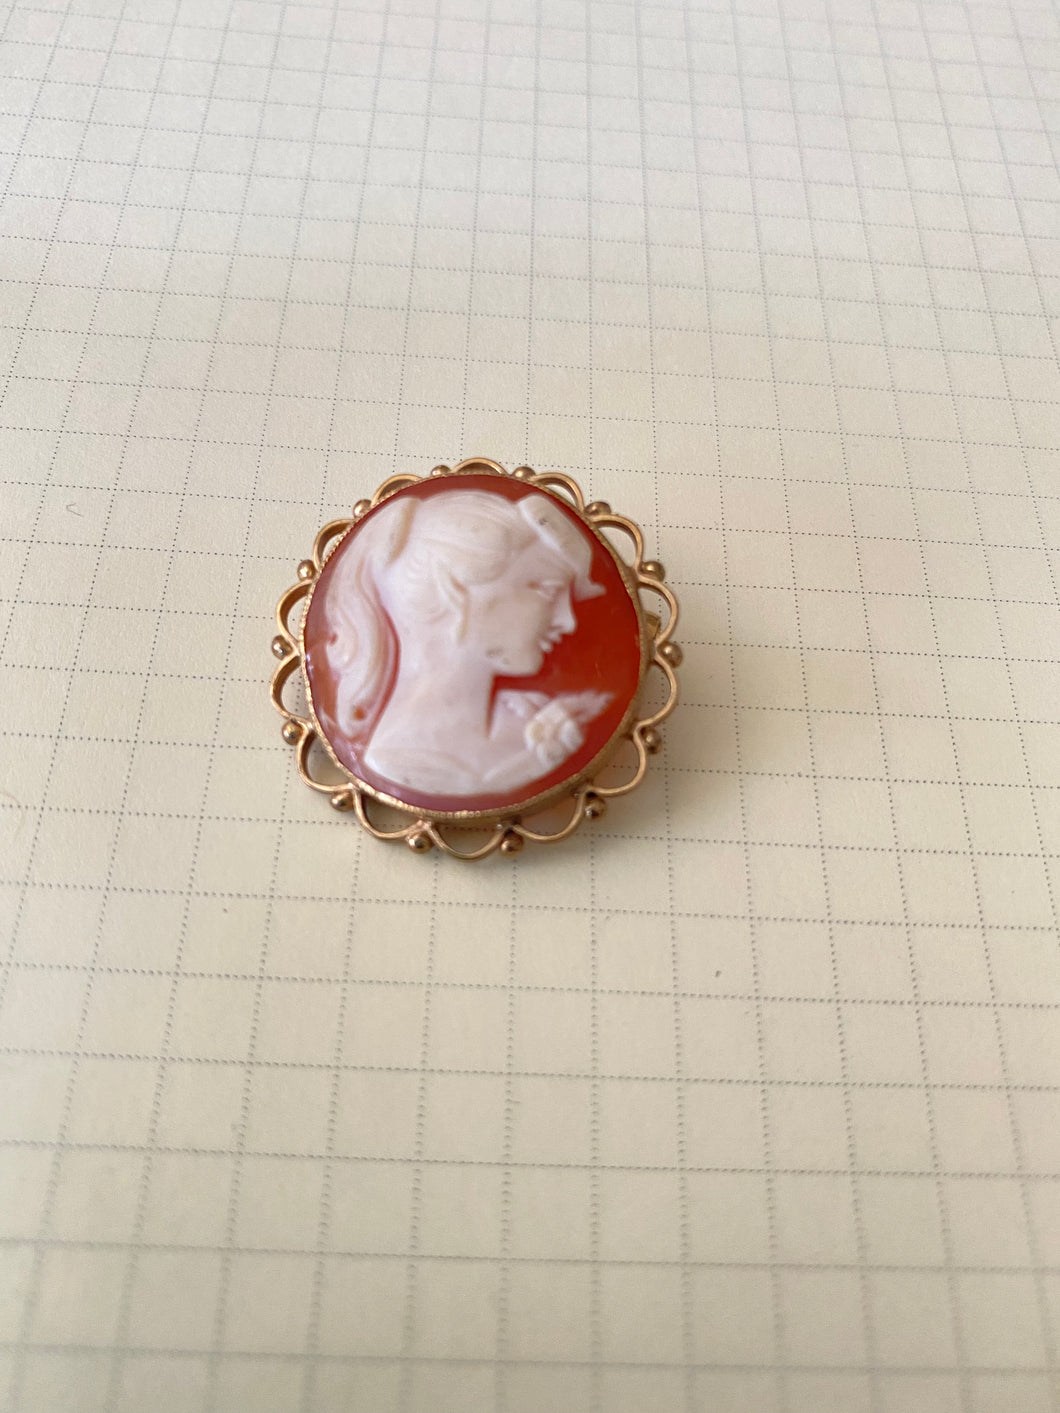 Antique 9K Gold Cameo Woman with a Ponytail - The Curatorial Dept.